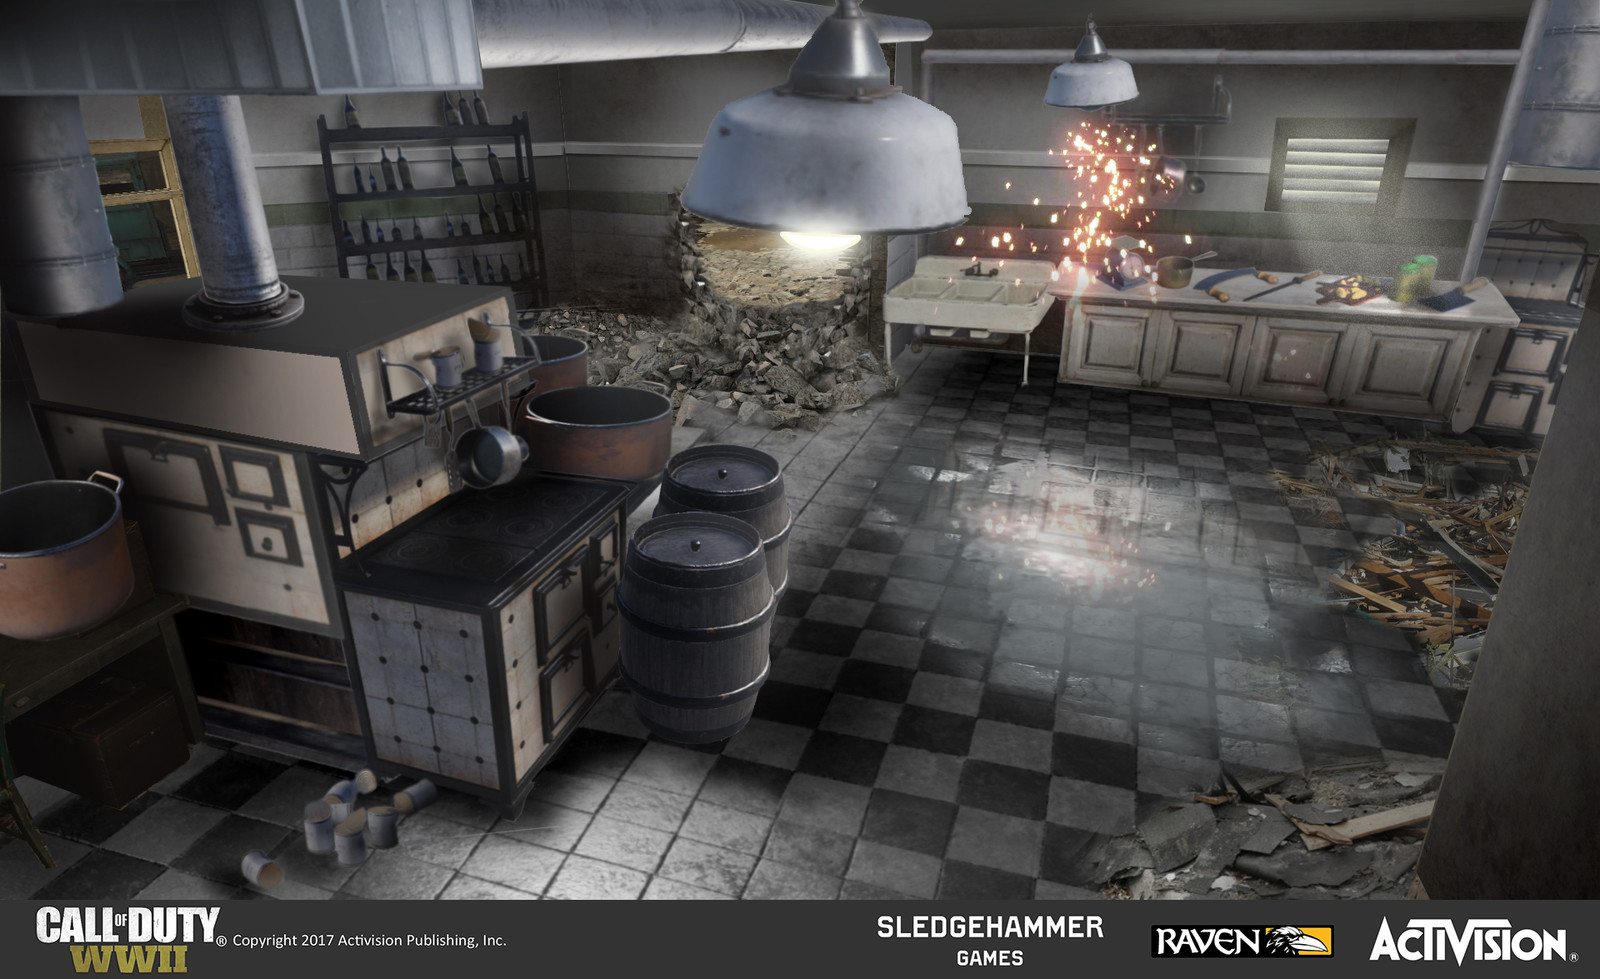 Concept image of a destroyed restaurant kitchen which encloses one of the Objective 2 hostage rescue areas. I created this image by painting over a base image using a combination of photobashing, digital painting, and images of in-game content.